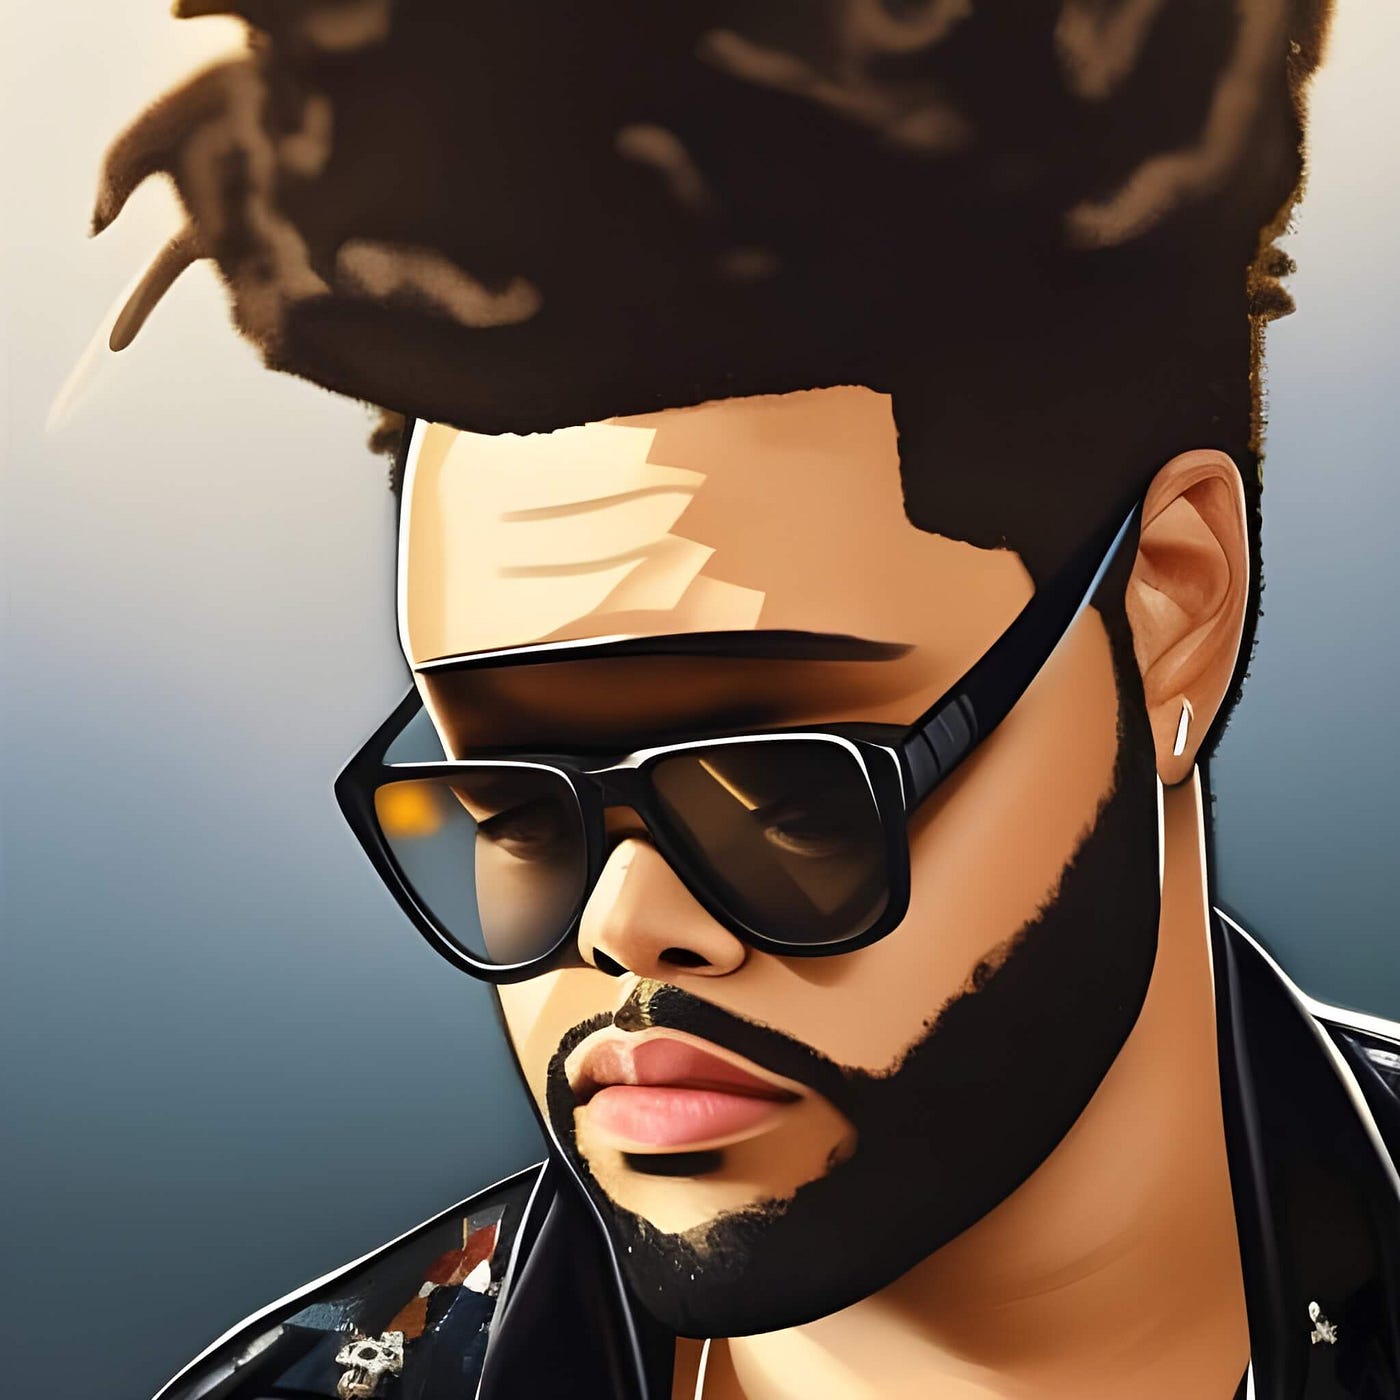 The Weeknd, Biography, Songs, Albums, & Facts